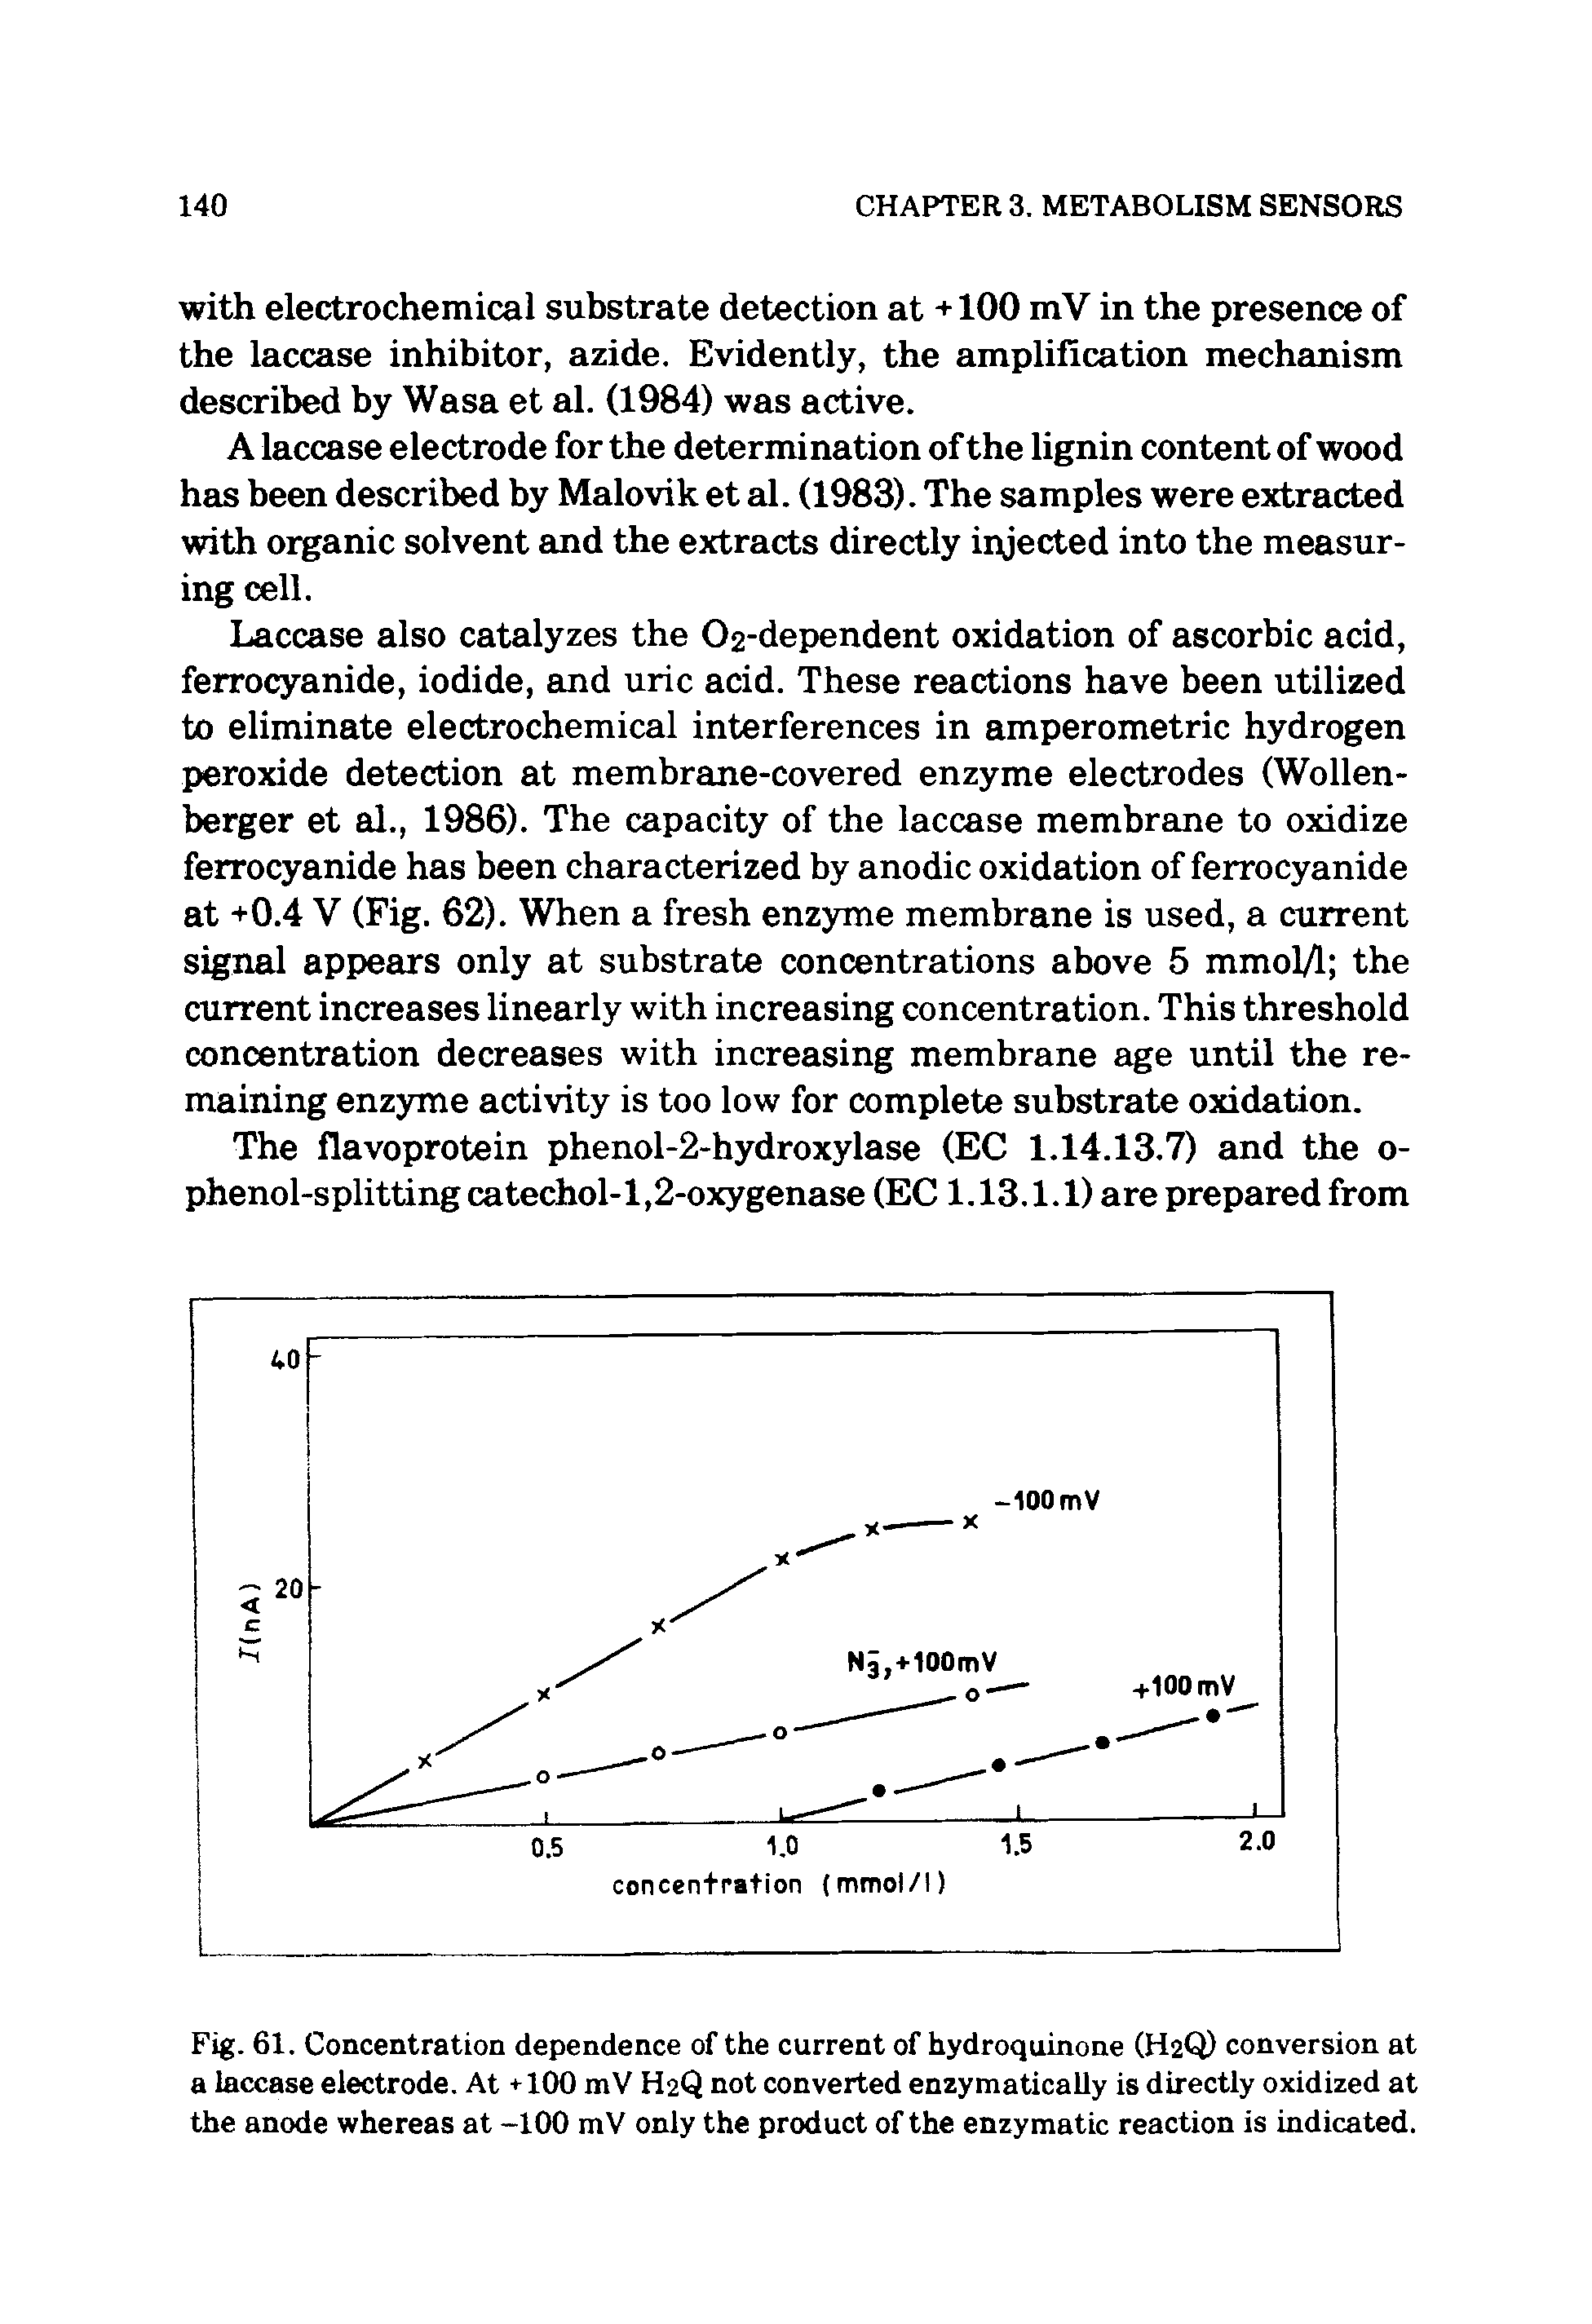 Fig. 61. Concentration dependence of the current of hydroquinone (H2Q) conversion at a laccase electrode. At +100 mV H2Q not converted enzymatically is directly oxidized at the anode whereas at -100 mV only the product of the enzymatic reaction is indicated.